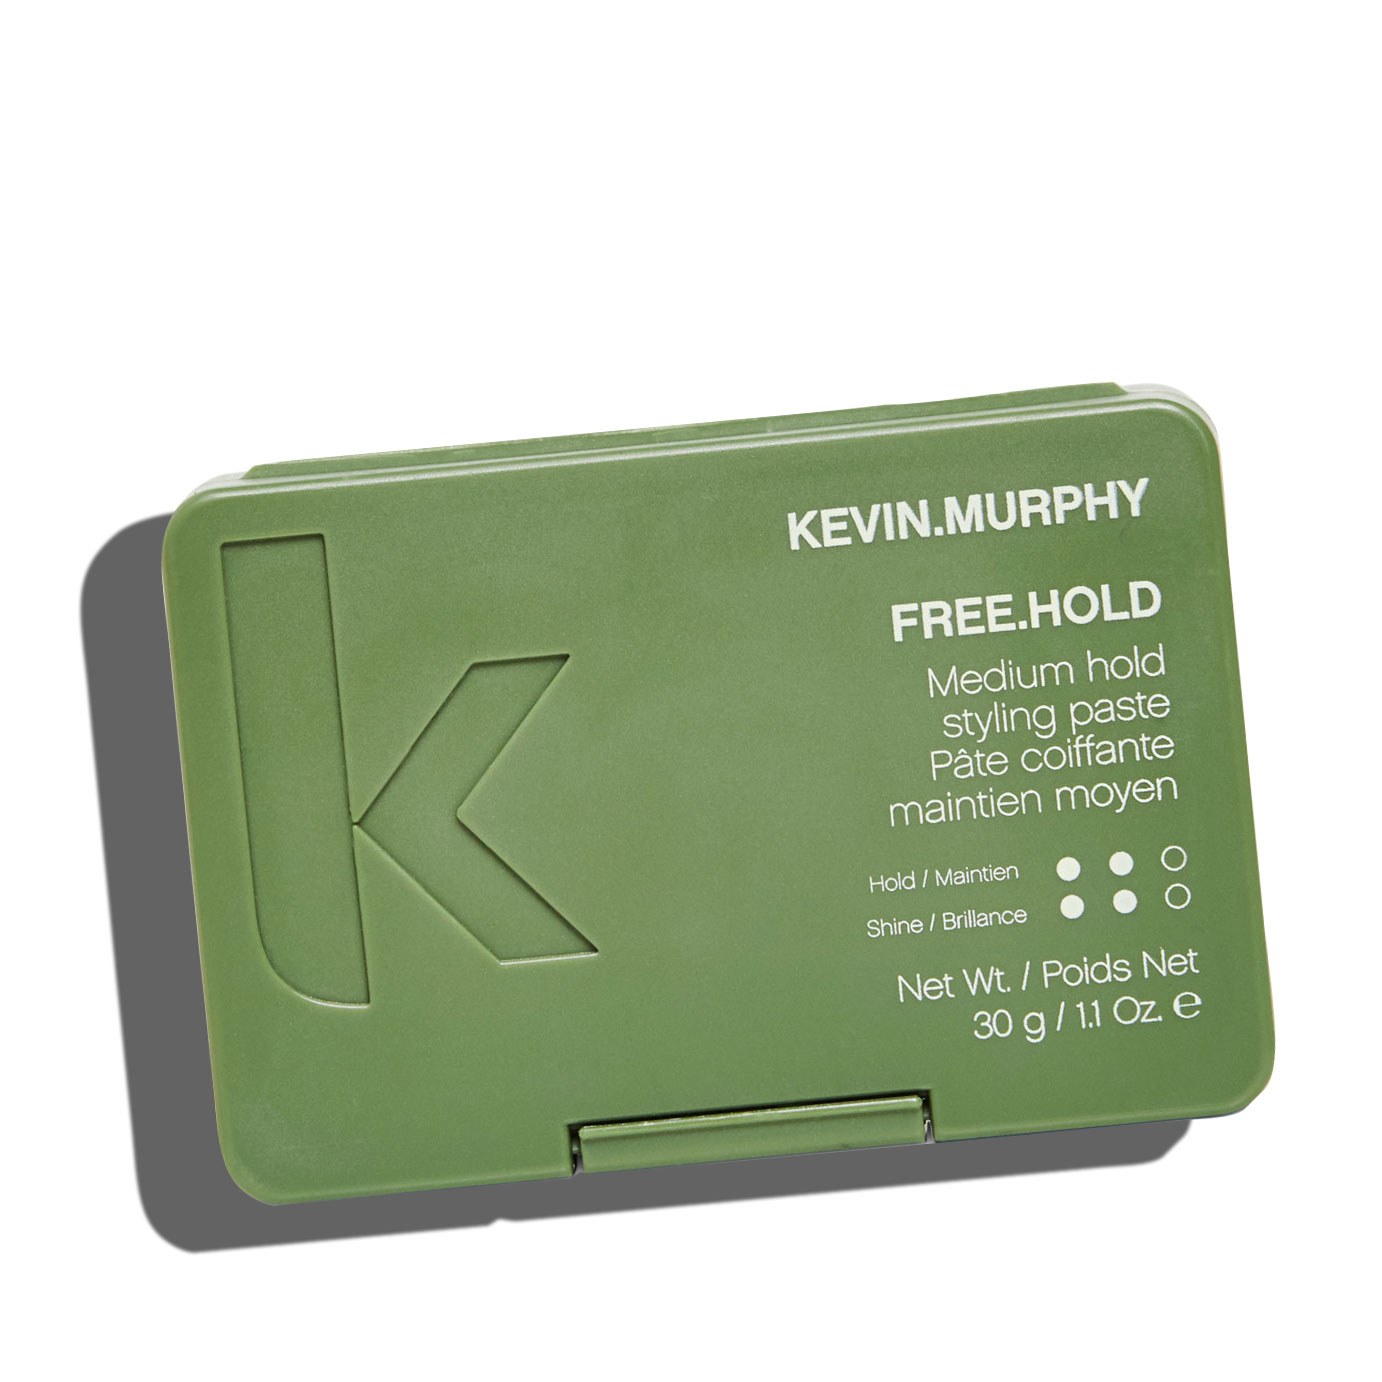 KEVIN.MURPHY For Men: FREE.HOLD 1.1oz